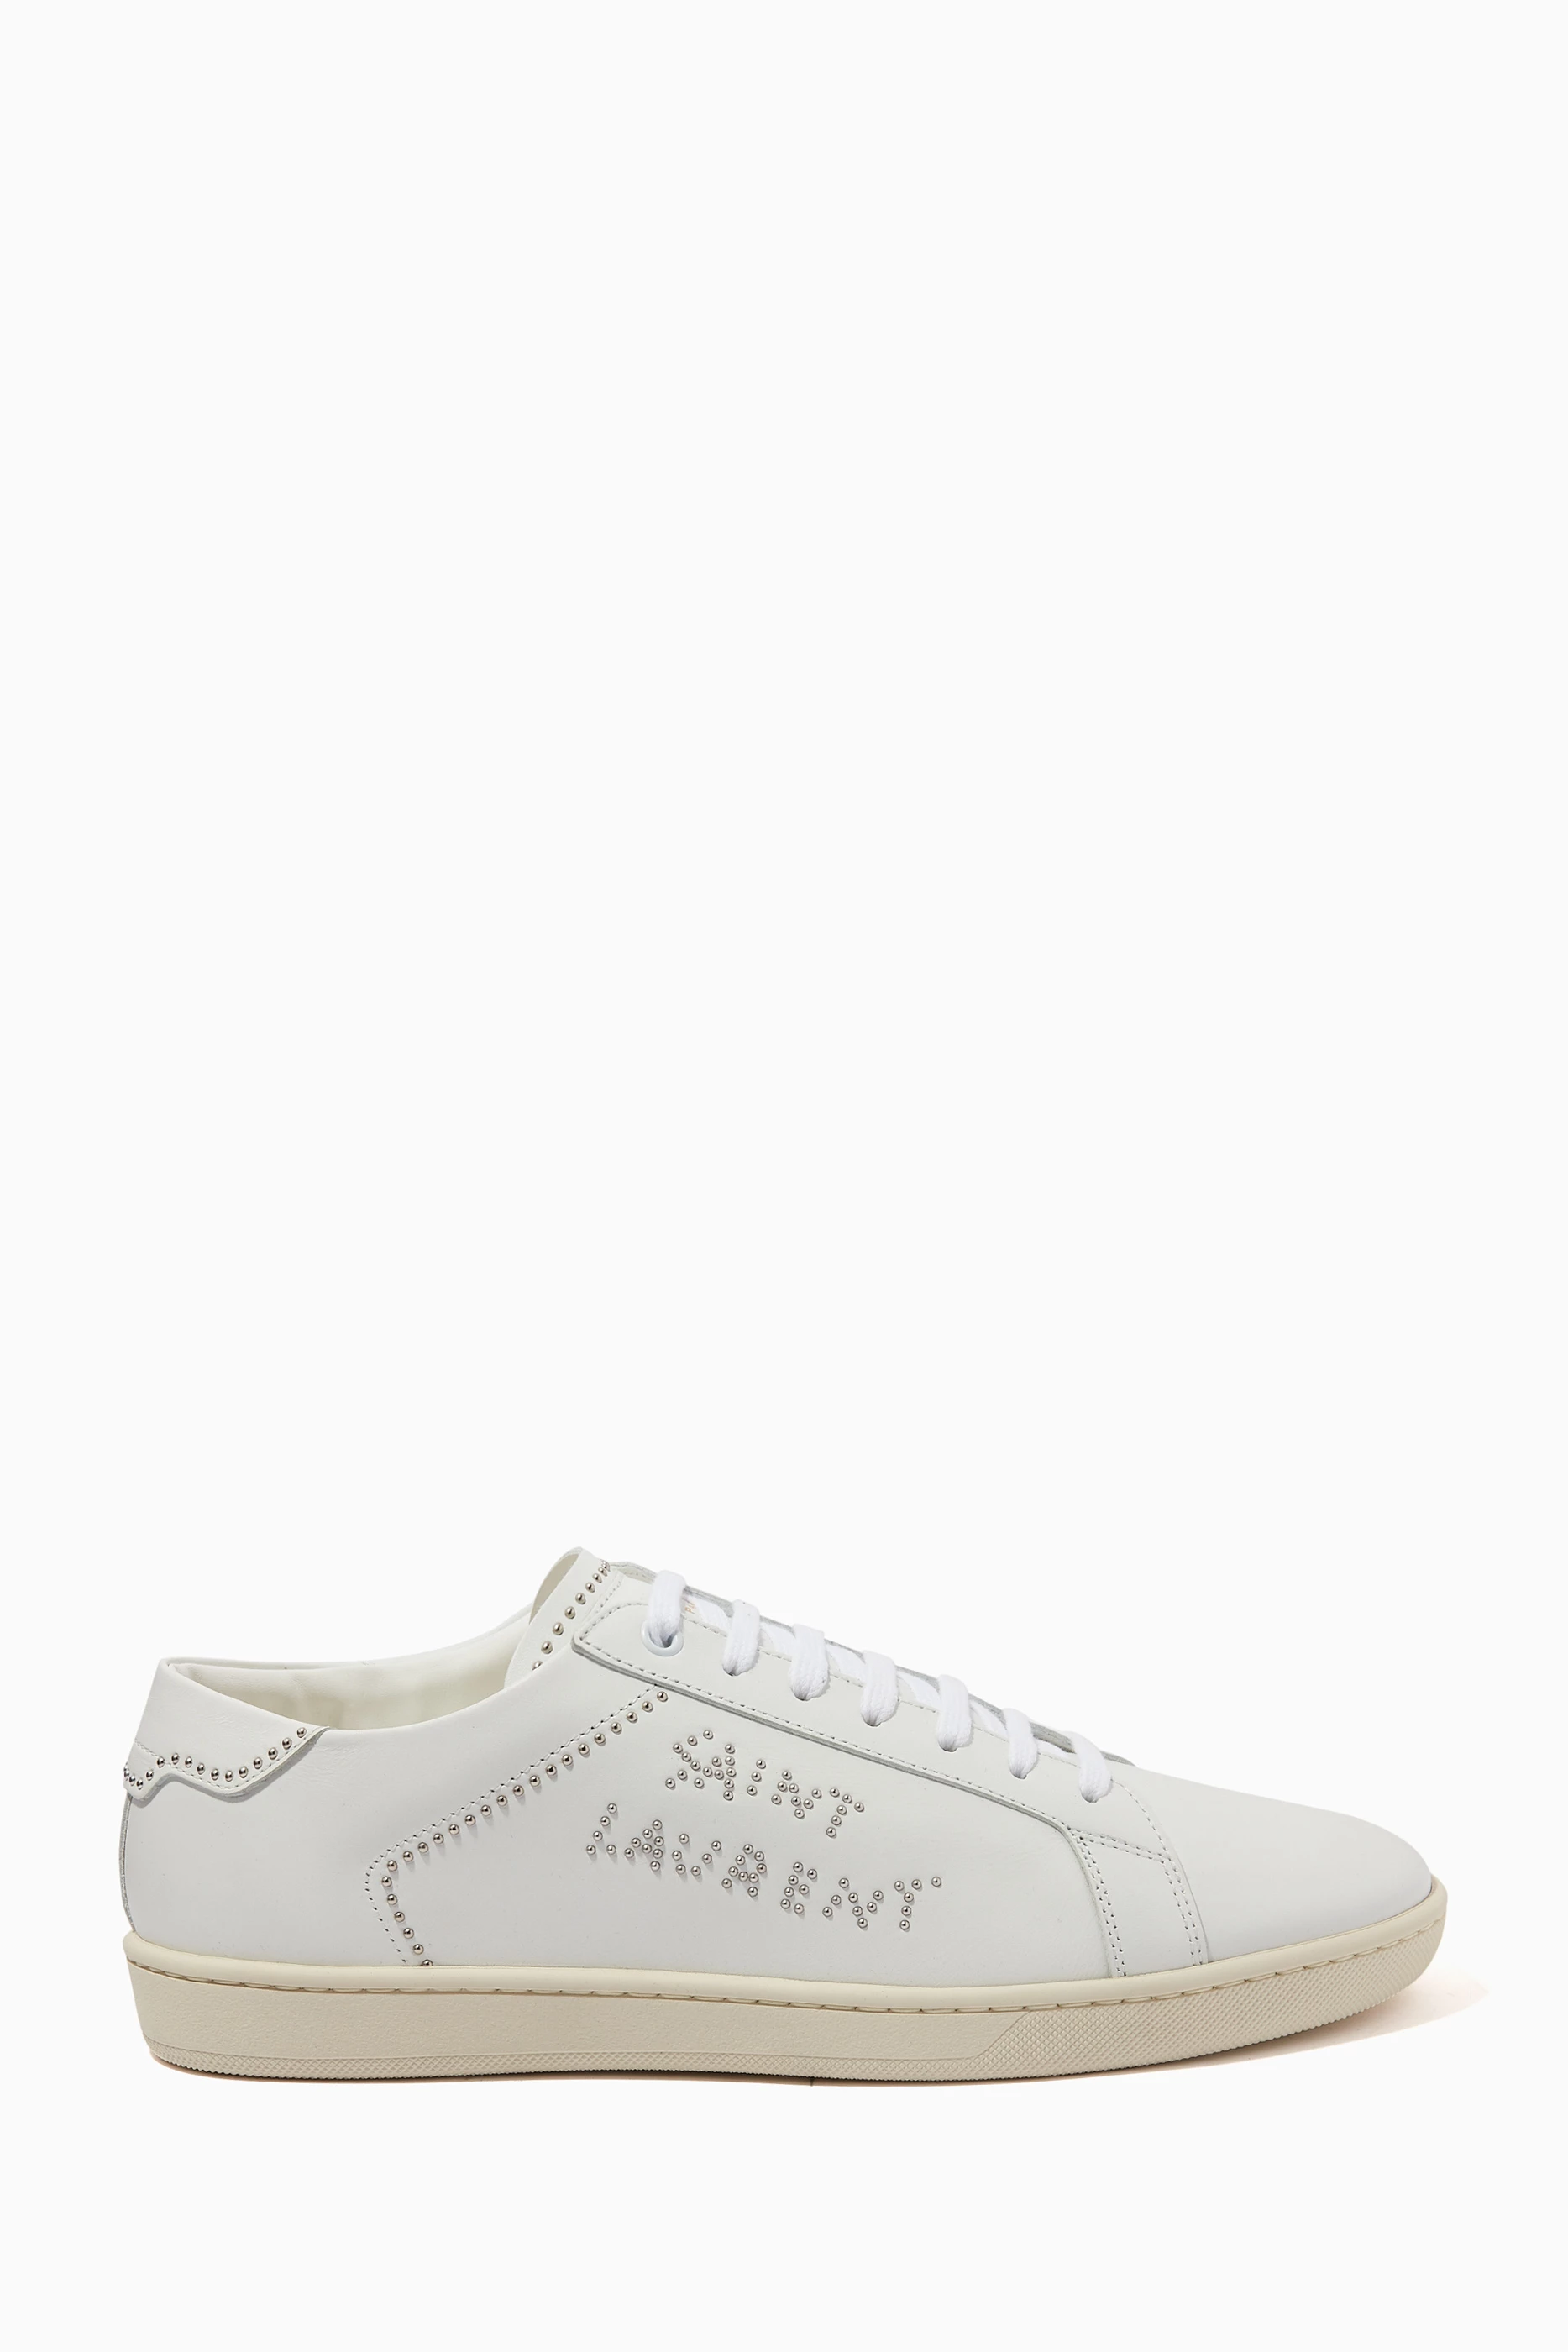 Stavning Marquee nåde Buy SAINT LAURENT White SL/08 Low-top Sneakers in Smooth Leather for MEN in  UAE | Ounass